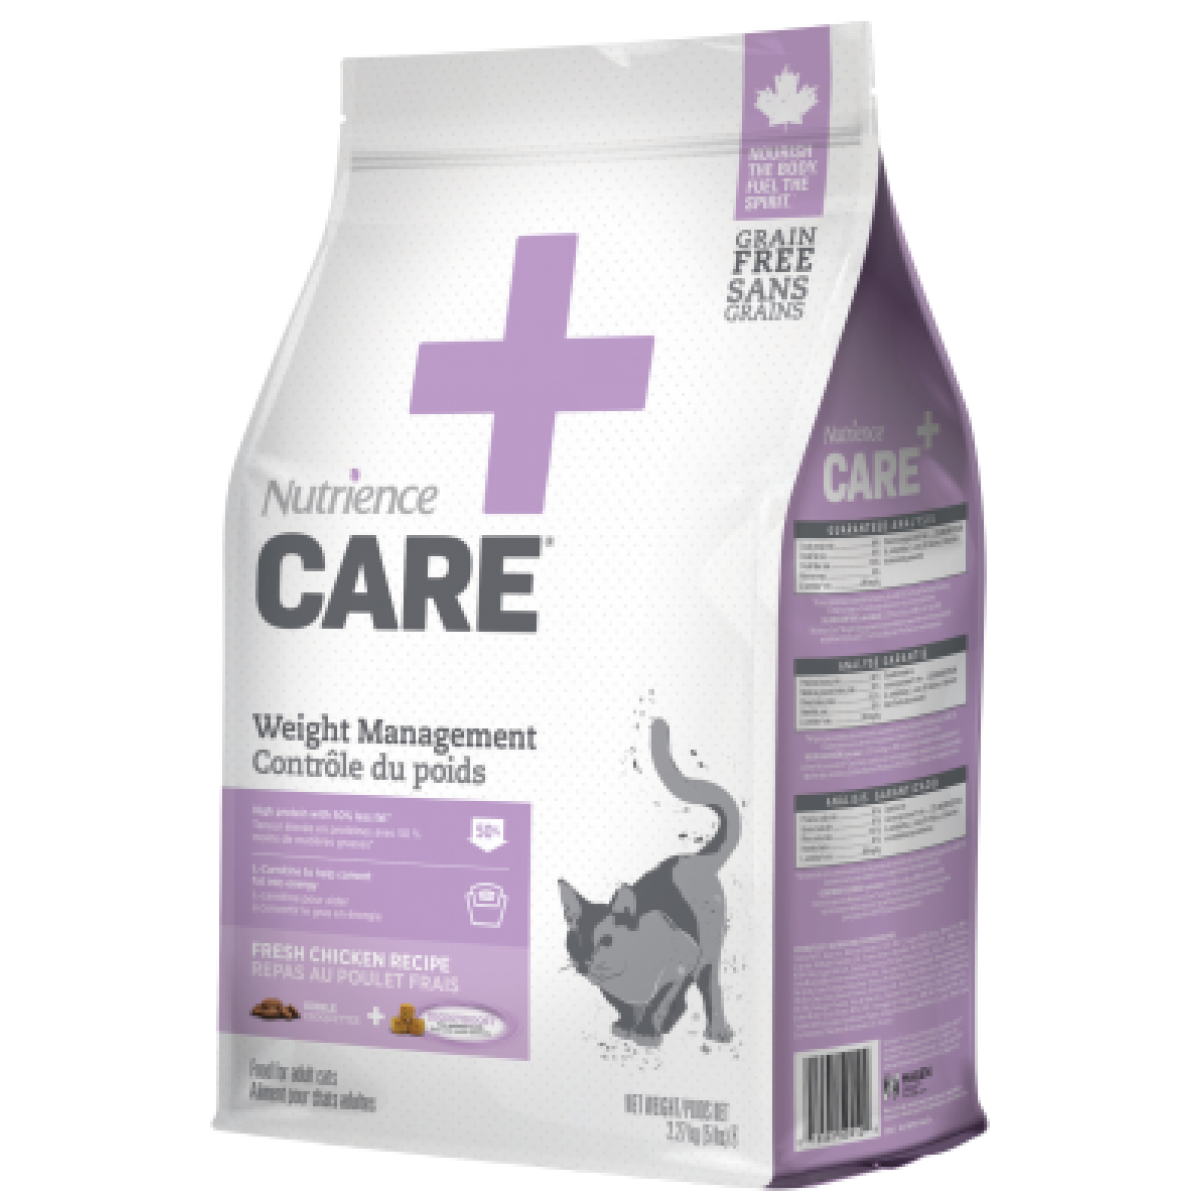 Nutrience Care - Weight Management Dry food For Cat